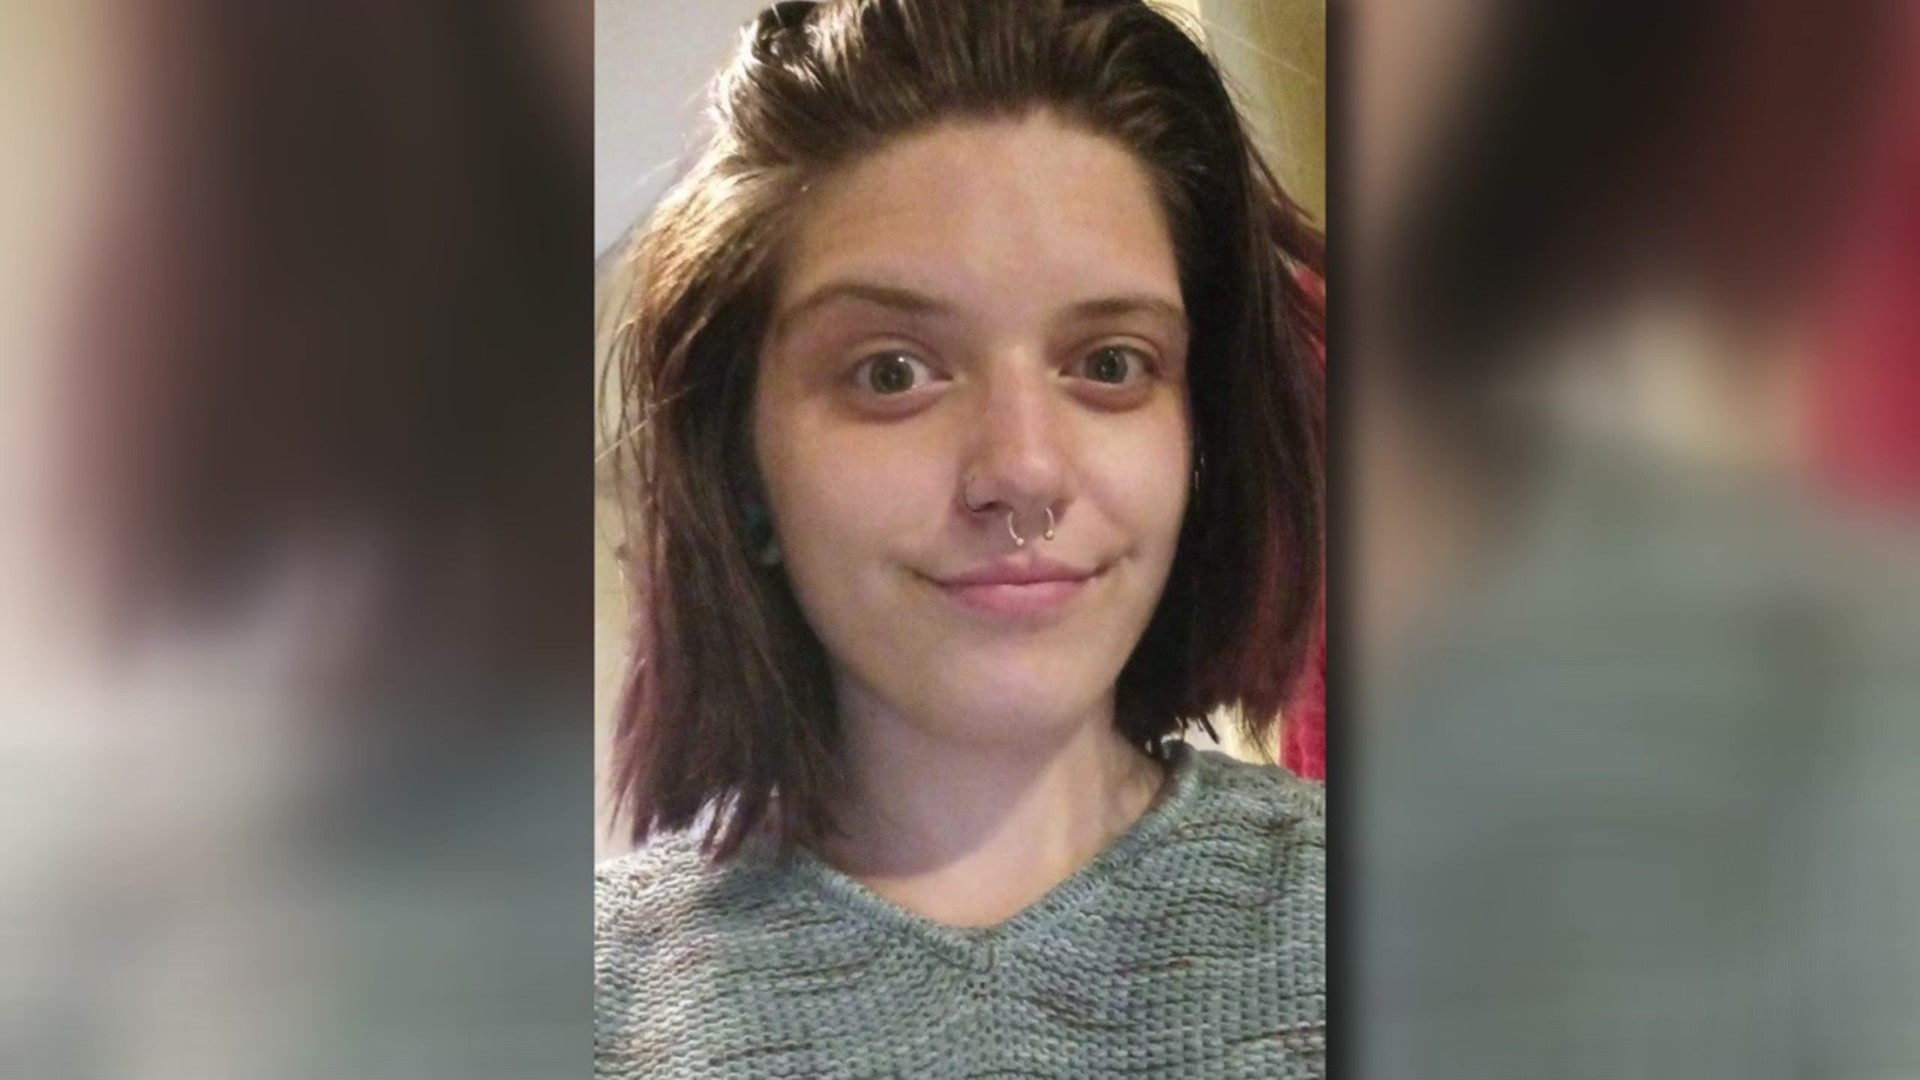 A man has been arrested in the death investigation of Cheyenne Swartz, who passed away days after being found badly injured near Shamokin.